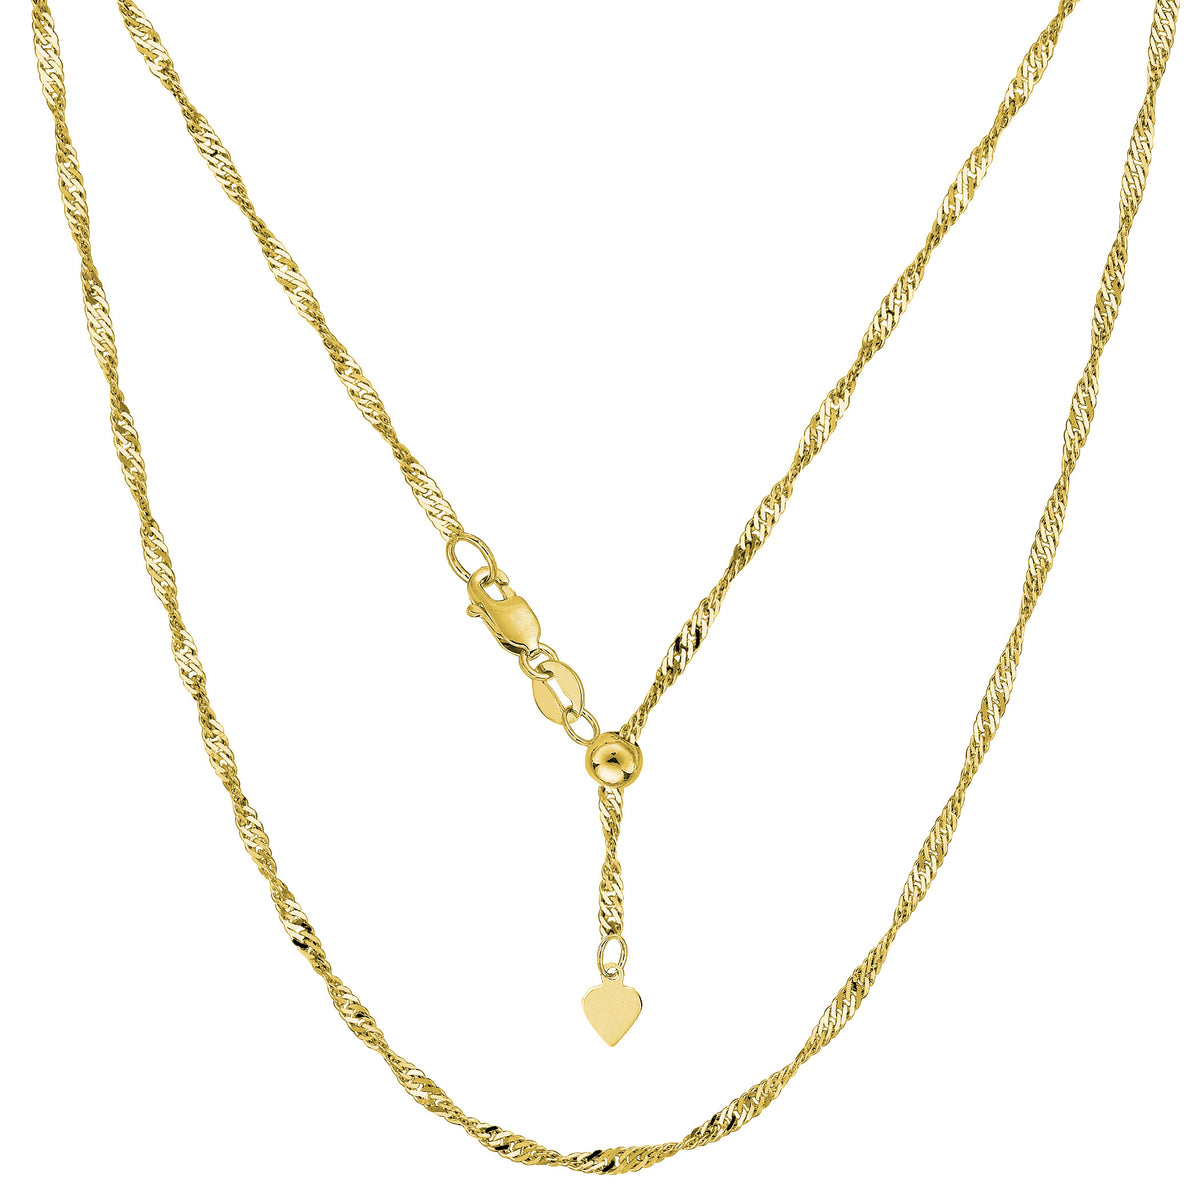 14k Yellow Gold Adjustable Singapore Link Chain Necklace, 1.15mm, 22" fine designer jewelry for men and women